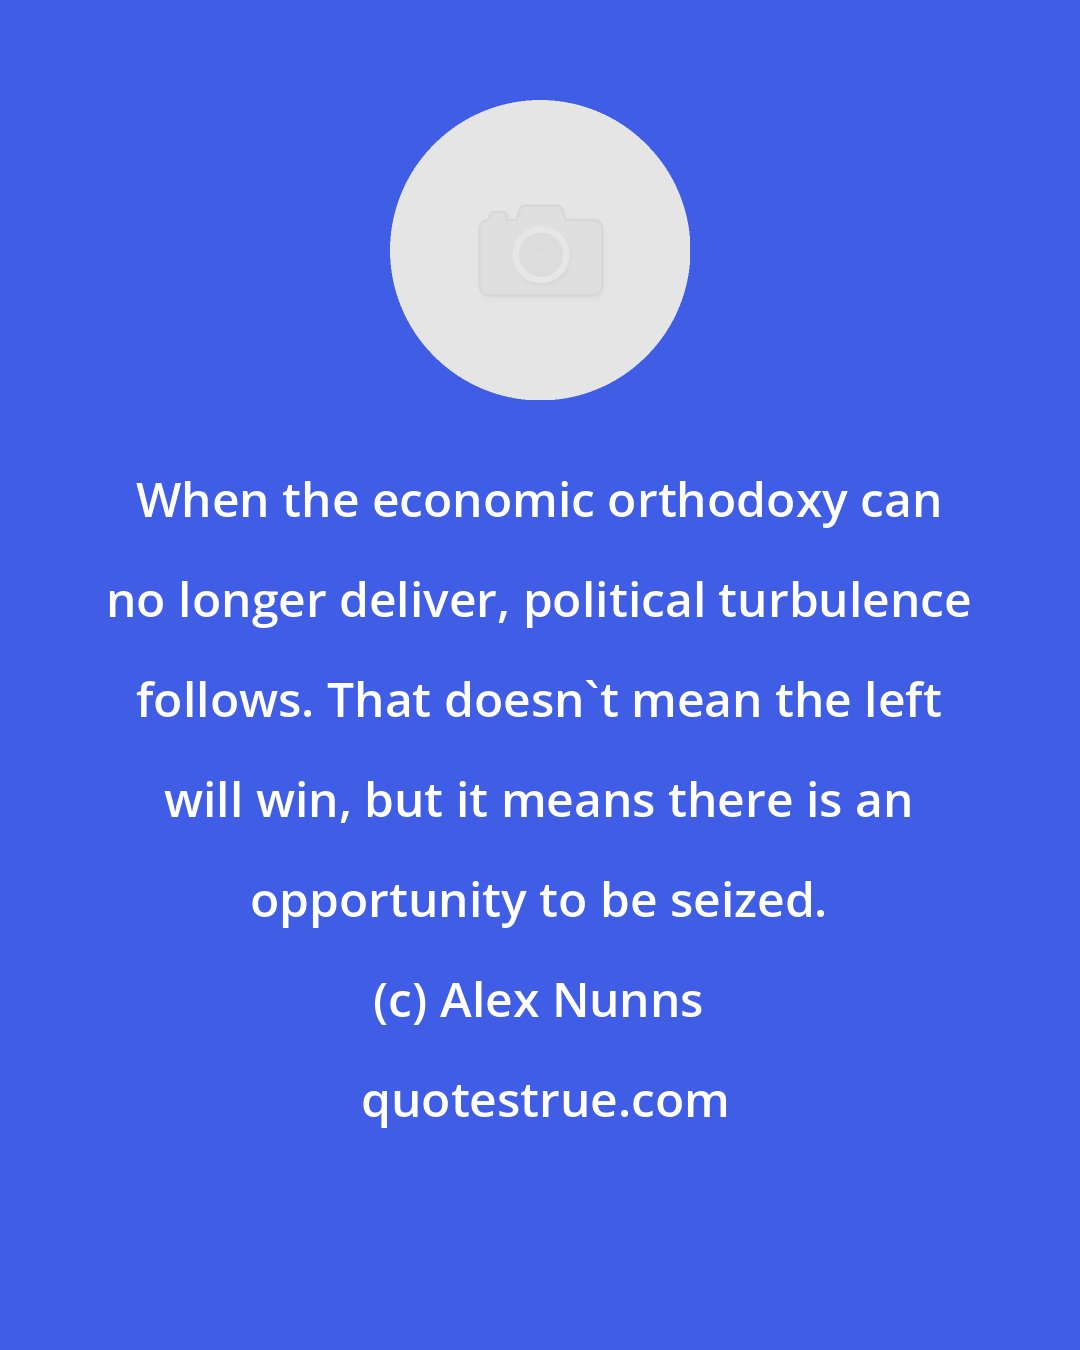 Alex Nunns: When the economic orthodoxy can no longer deliver, political turbulence follows. That doesn't mean the left will win, but it means there is an opportunity to be seized.